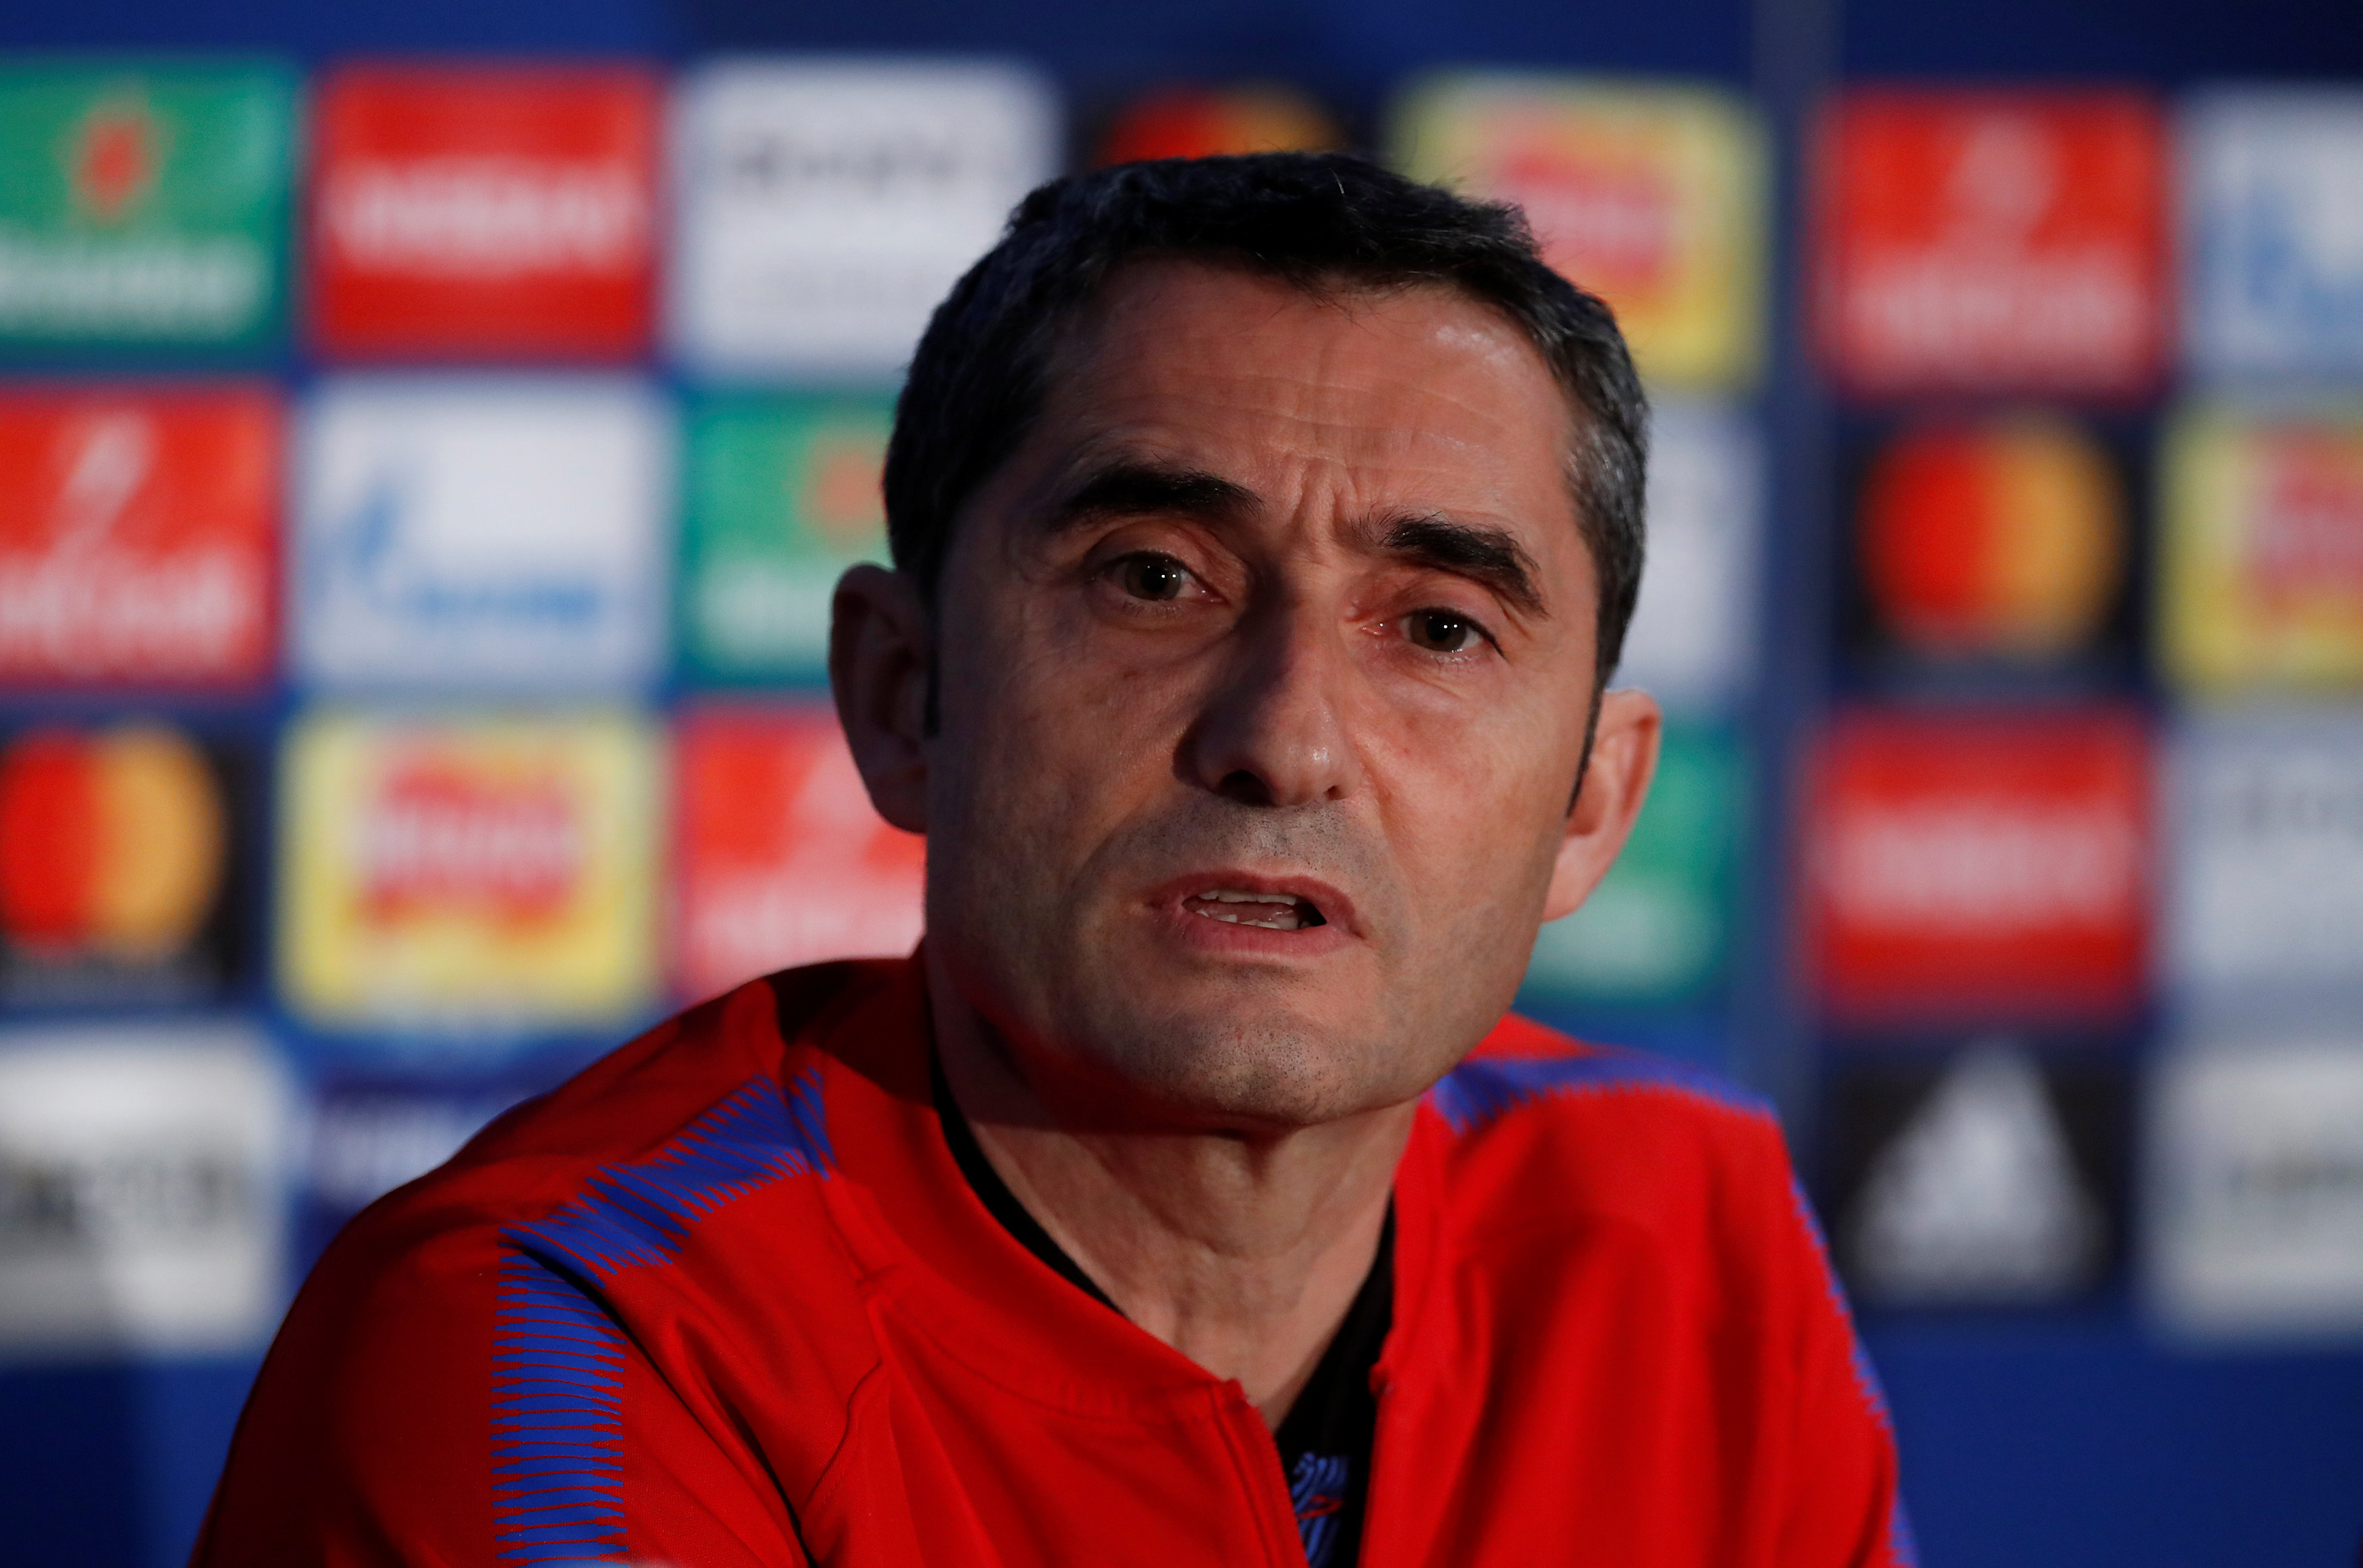 Football: Barca wanted to avoid Chelsea, says Valverde